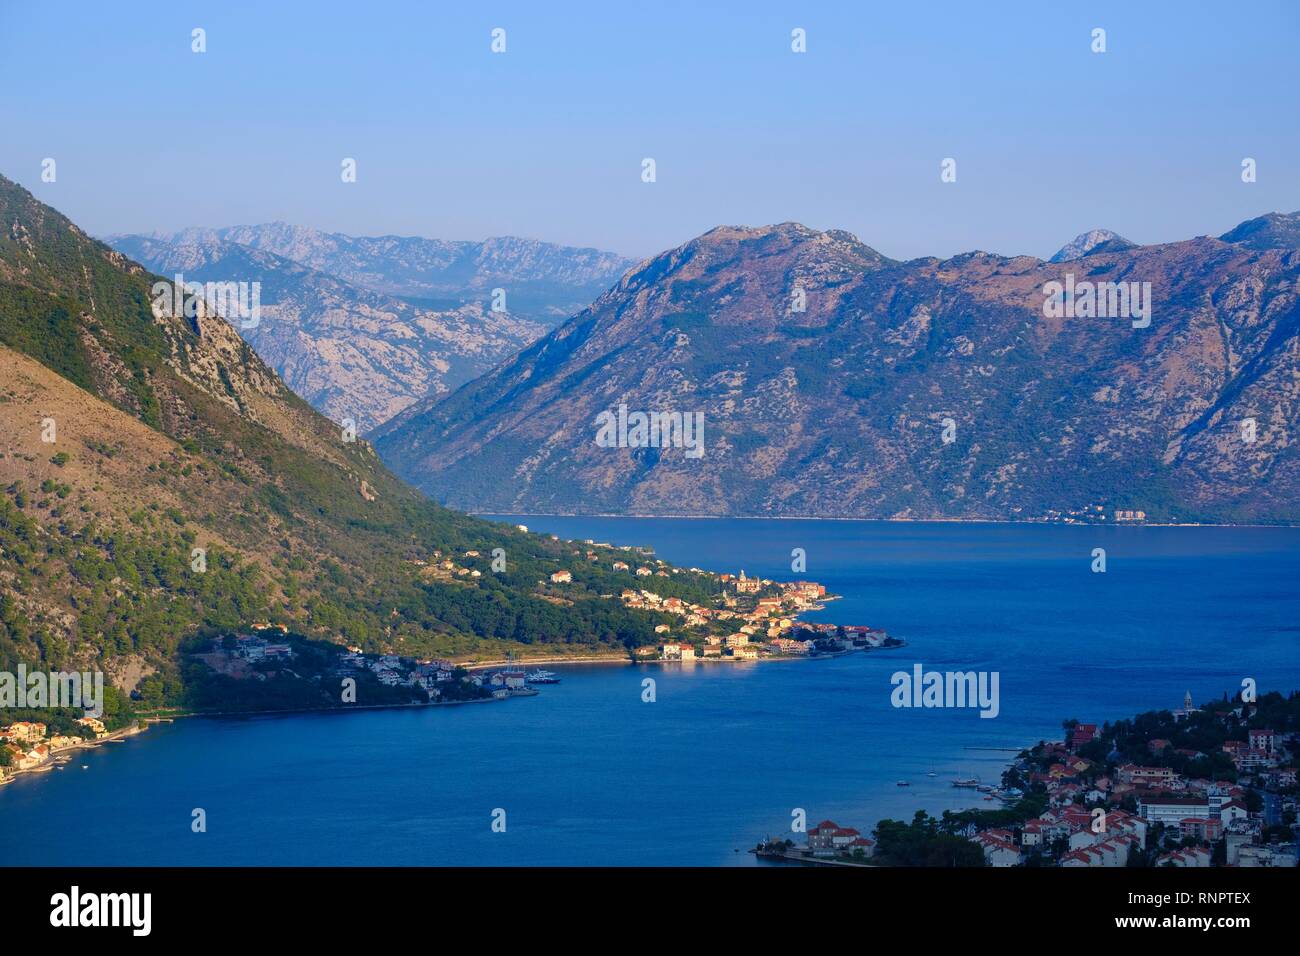 Village Prcanj, view from fortress Sveti Ivan, bay of Kotor, Montenegro Stock Photo